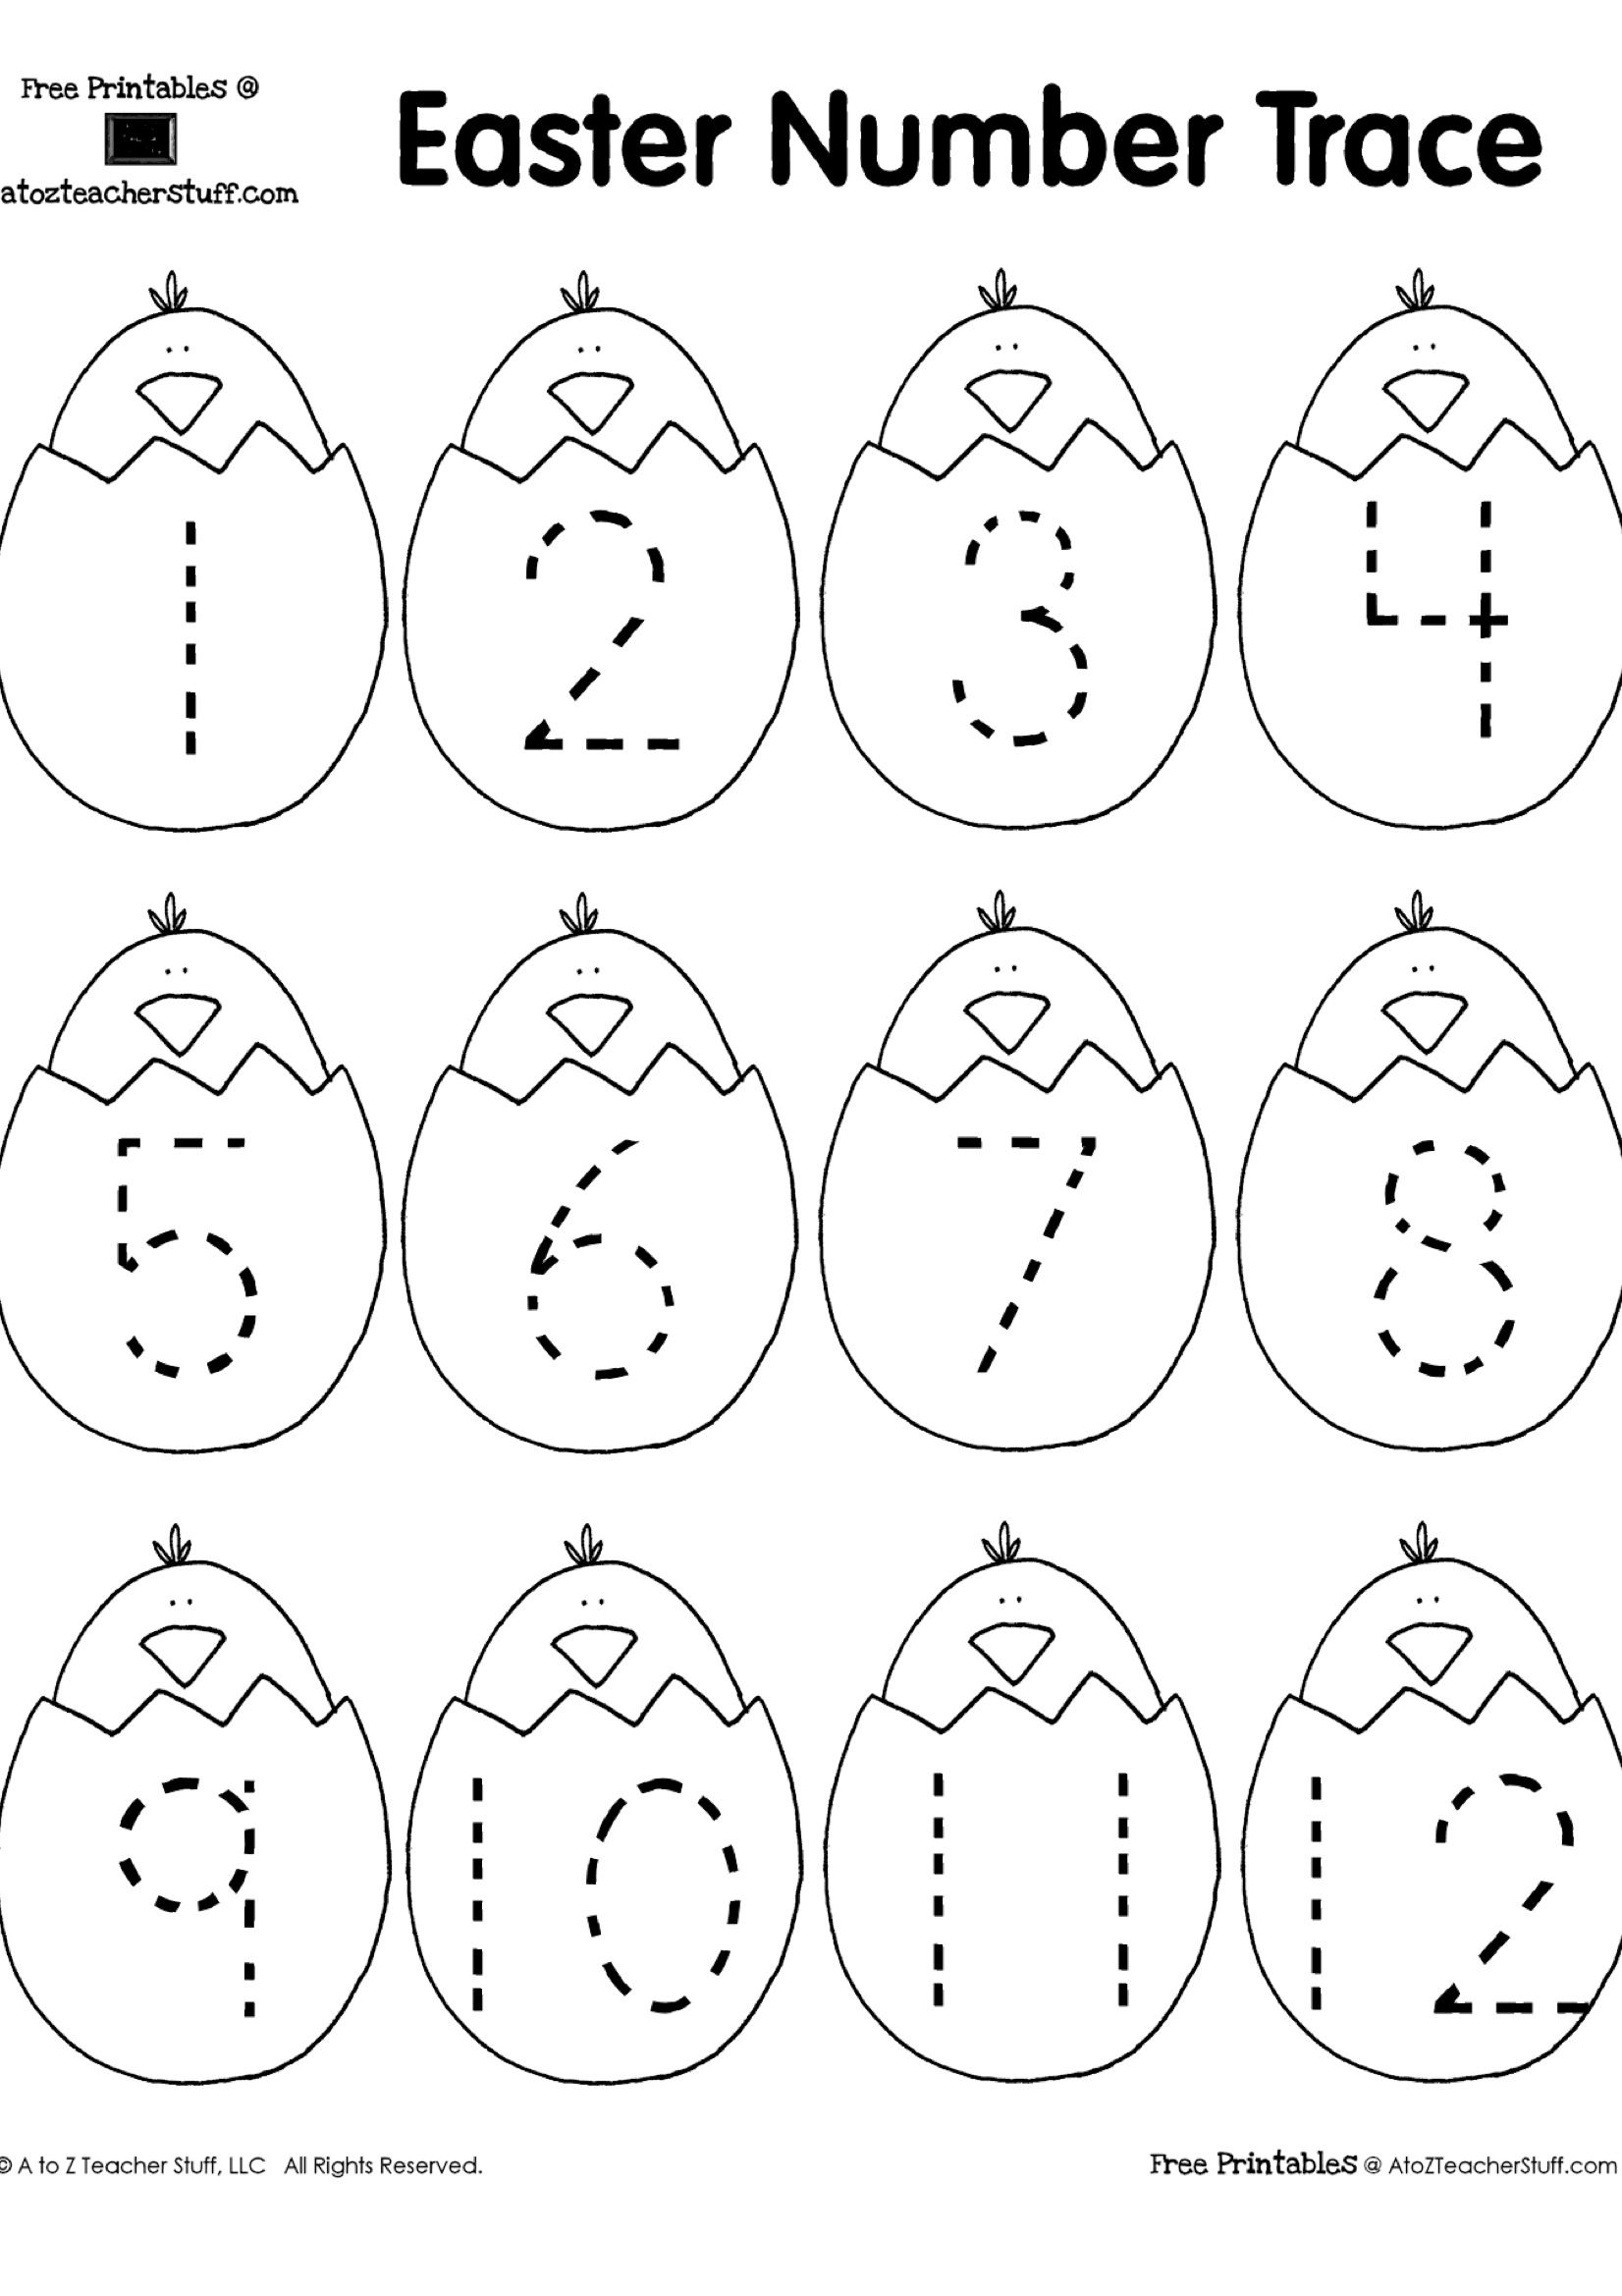 Free Traceable Worksheets #learning #education | Printable Coloring | Free Printable Easter Worksheets For Preschoolers